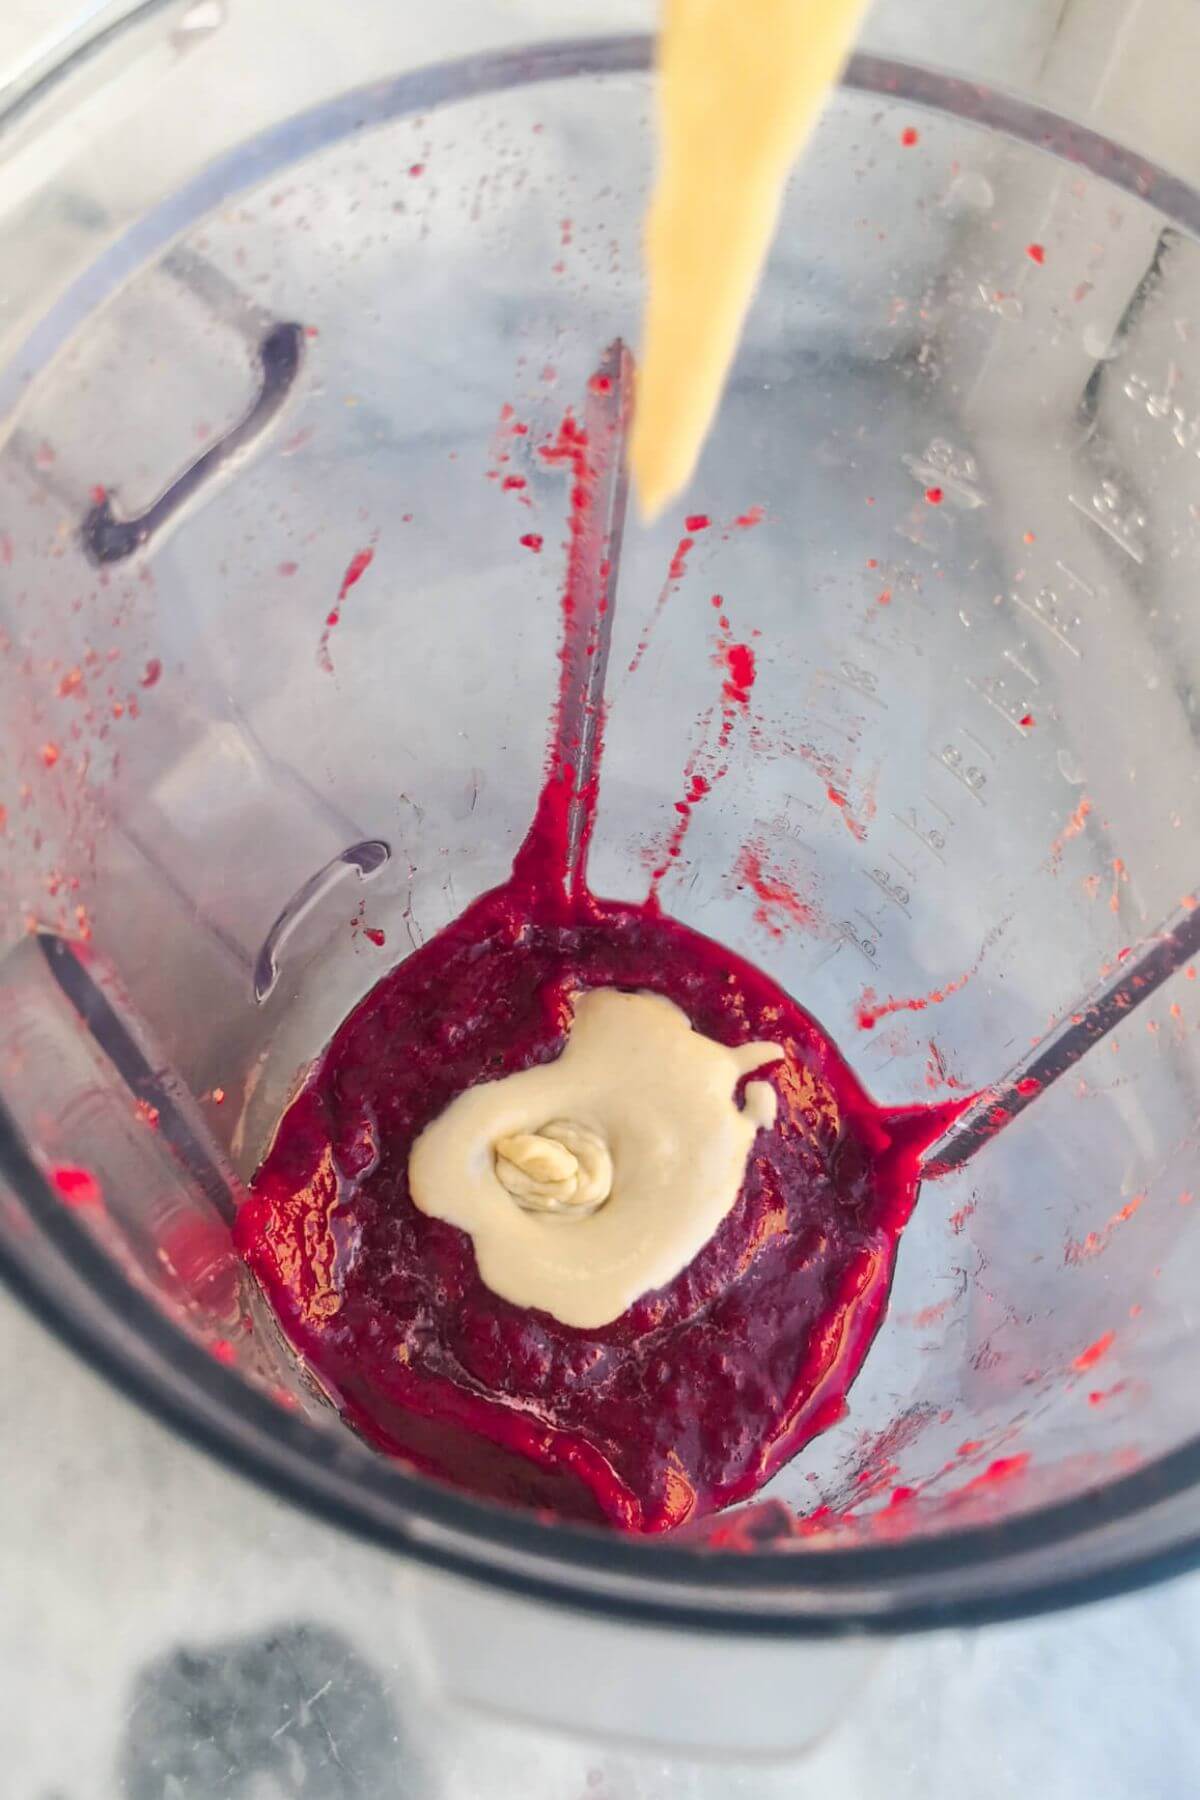 Tahini being added to a blender with beetroot puree.